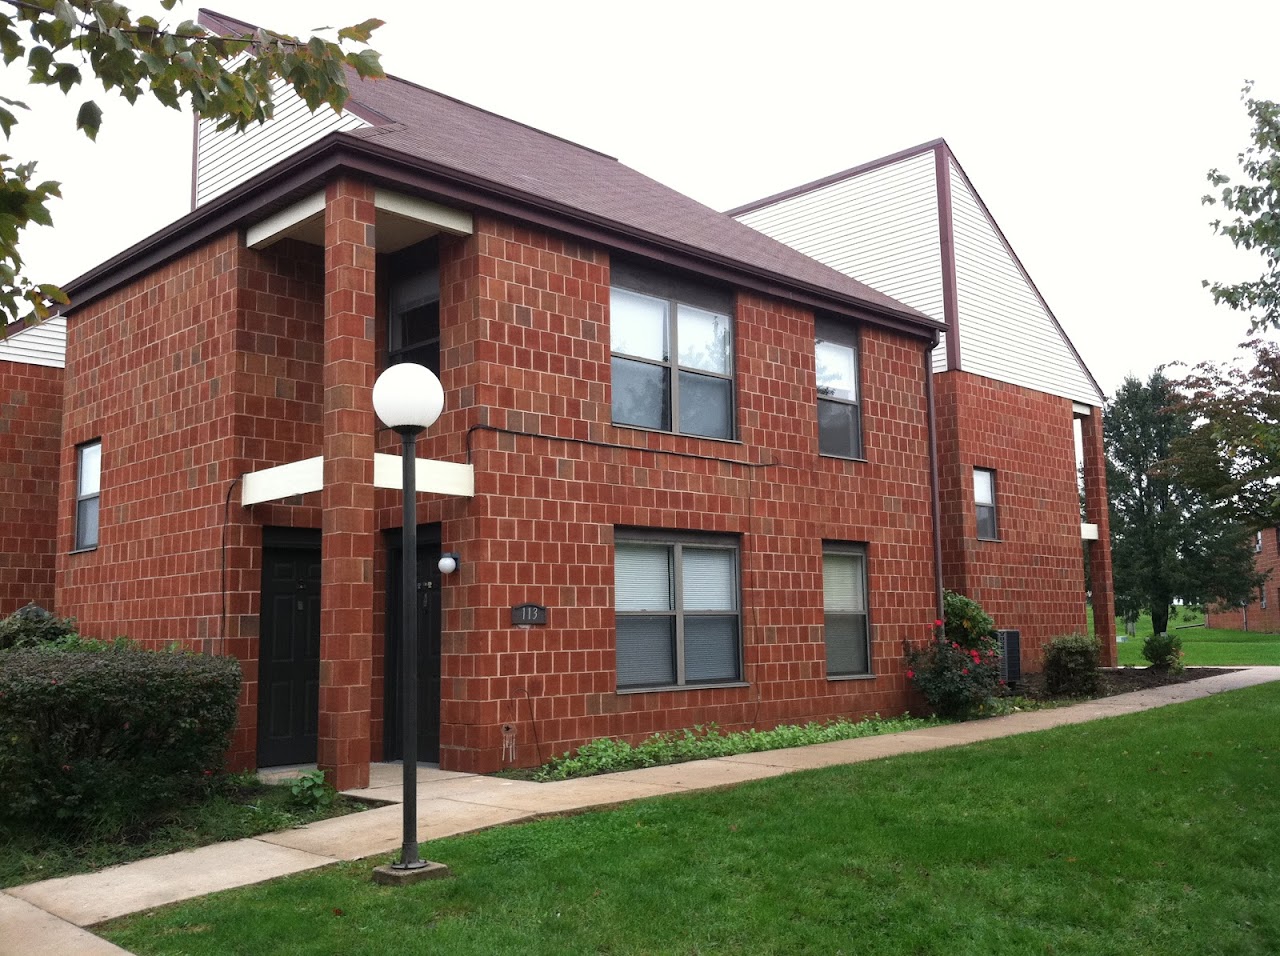 Photo of OAK BOTTOM VILLAGE II. Affordable housing located at GROFFDALE DR QUARRYVILLE, PA 17566